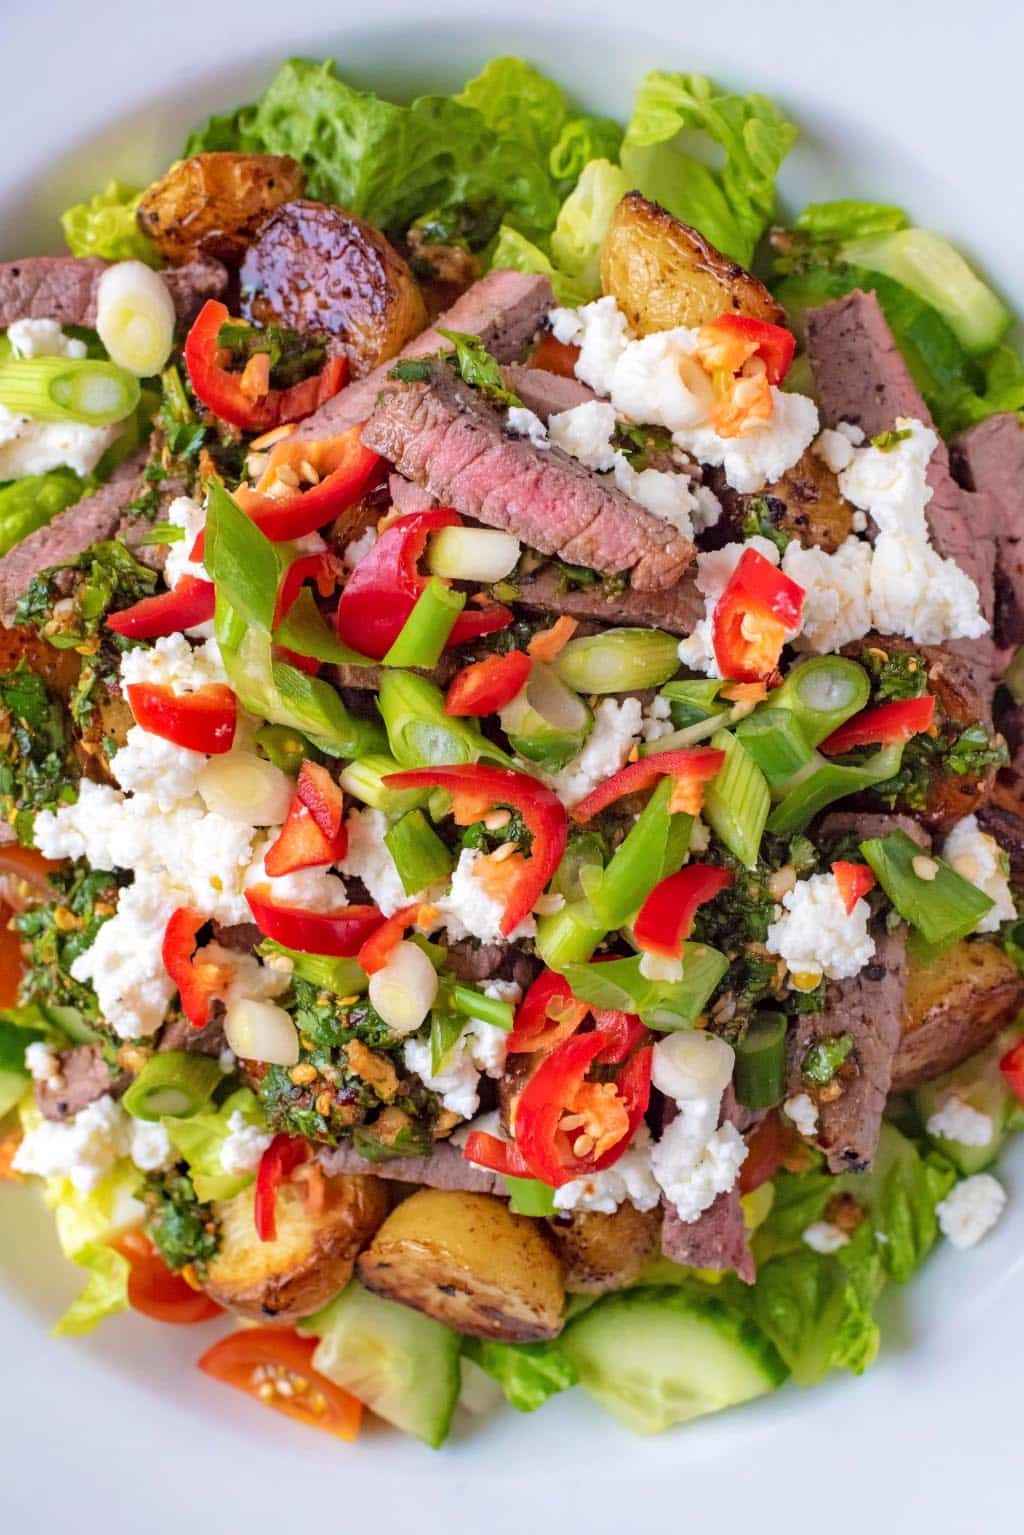 Salad leaves topped with sliced steak, cheese and chillies.